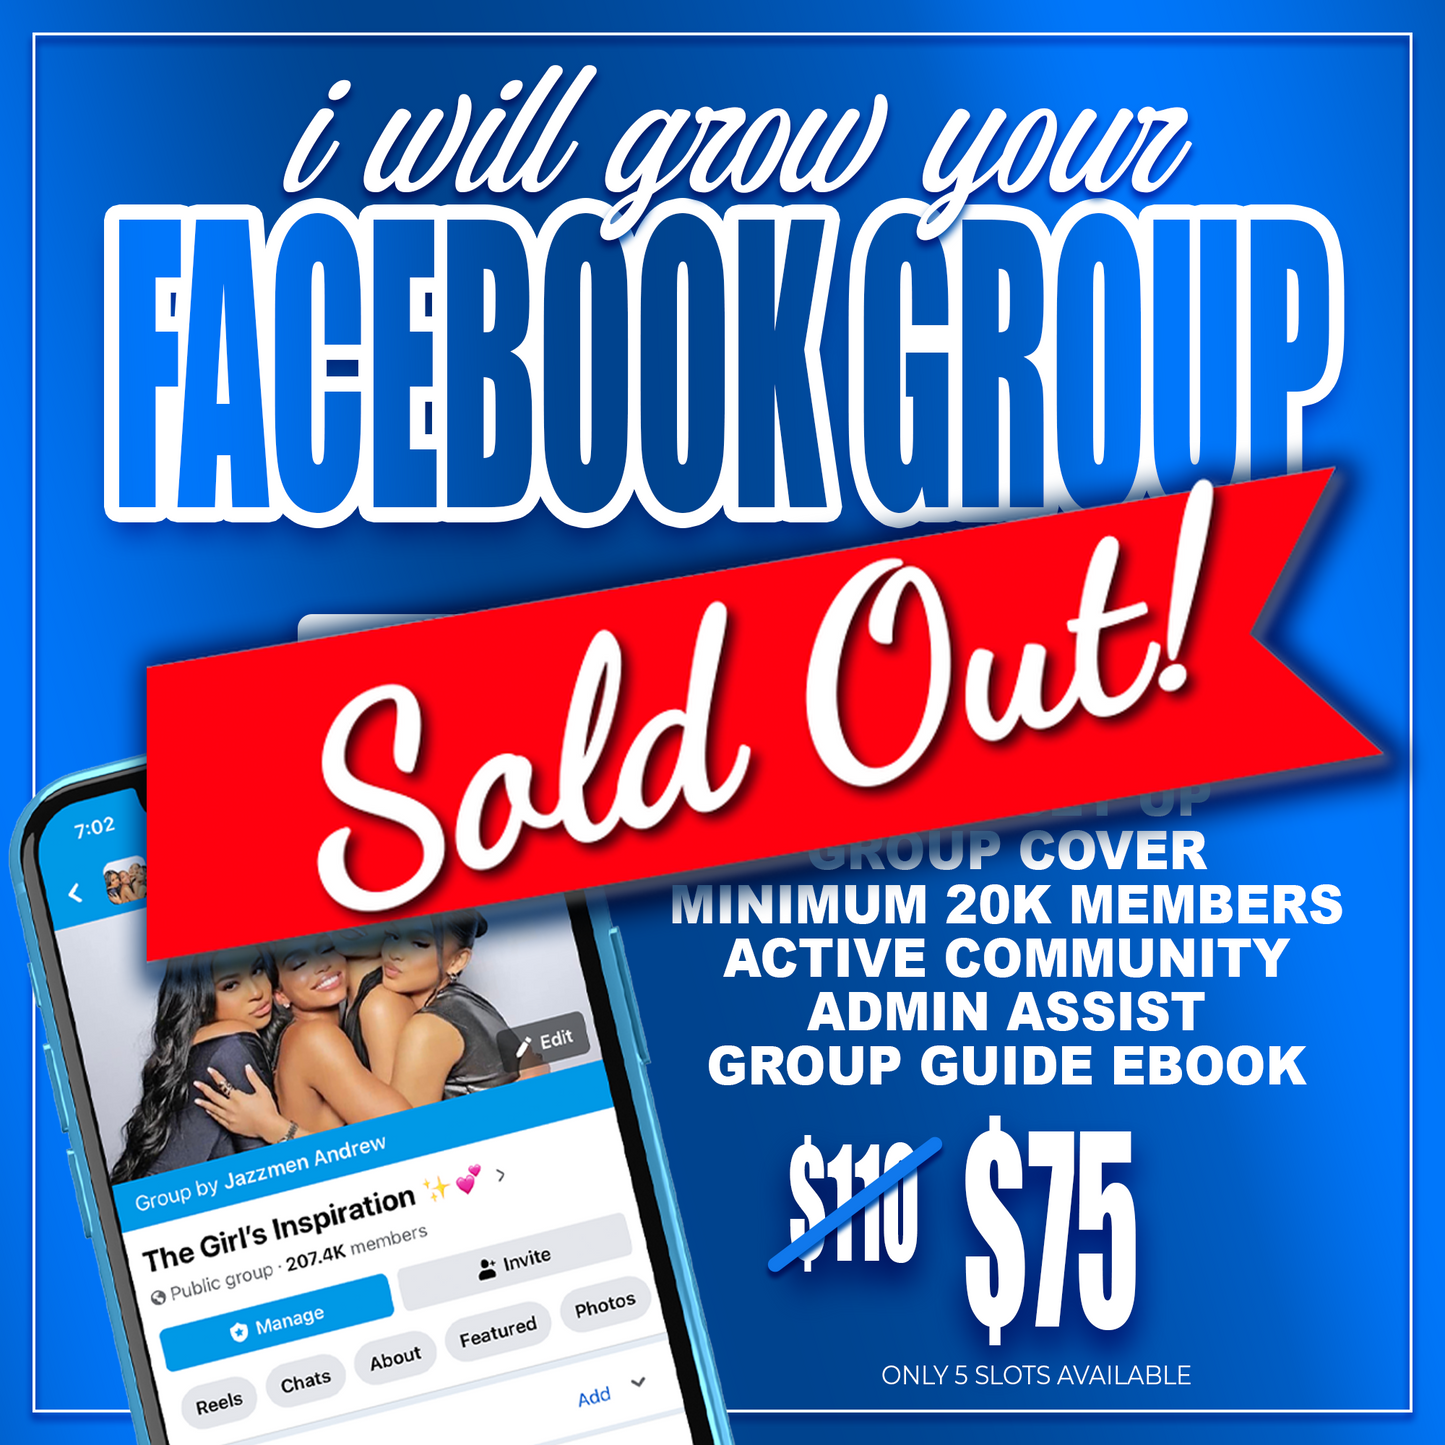 Facebook Group Creation & Growth Service